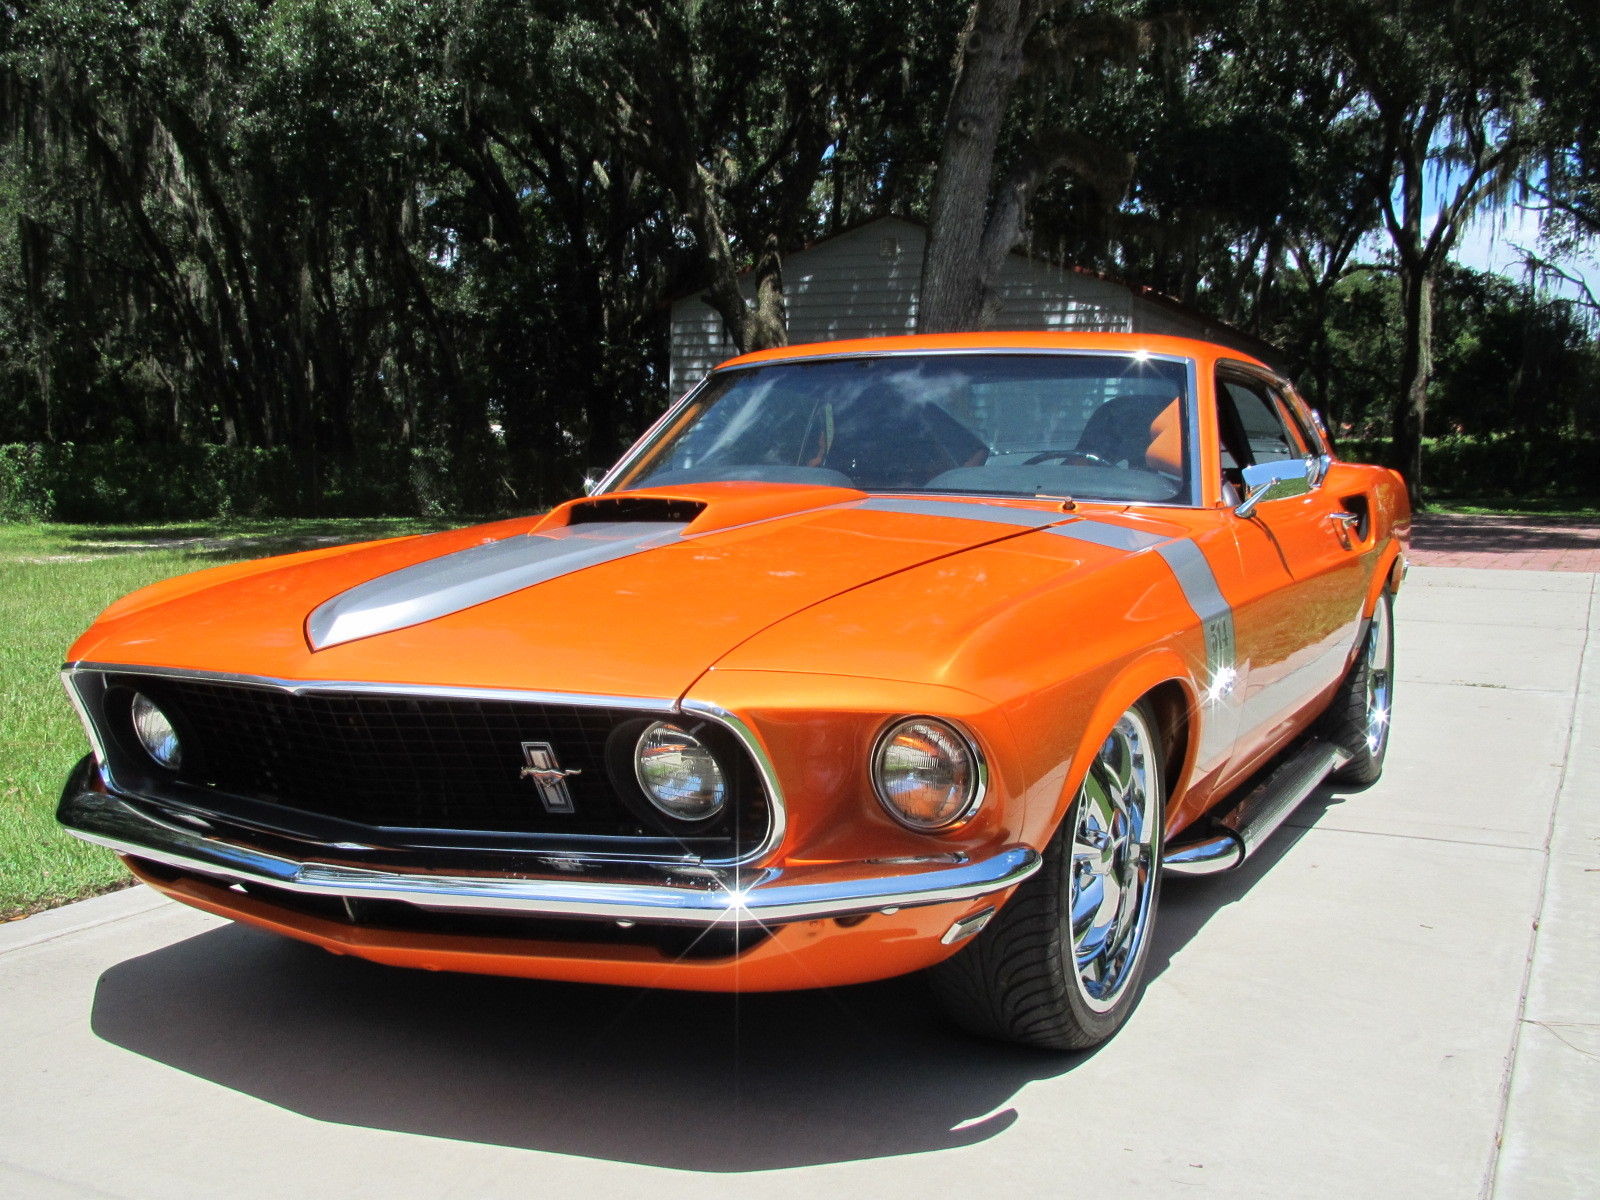 Ford Mustang Mach I showcar Protouring Restromod Classic 1970 1969 ...